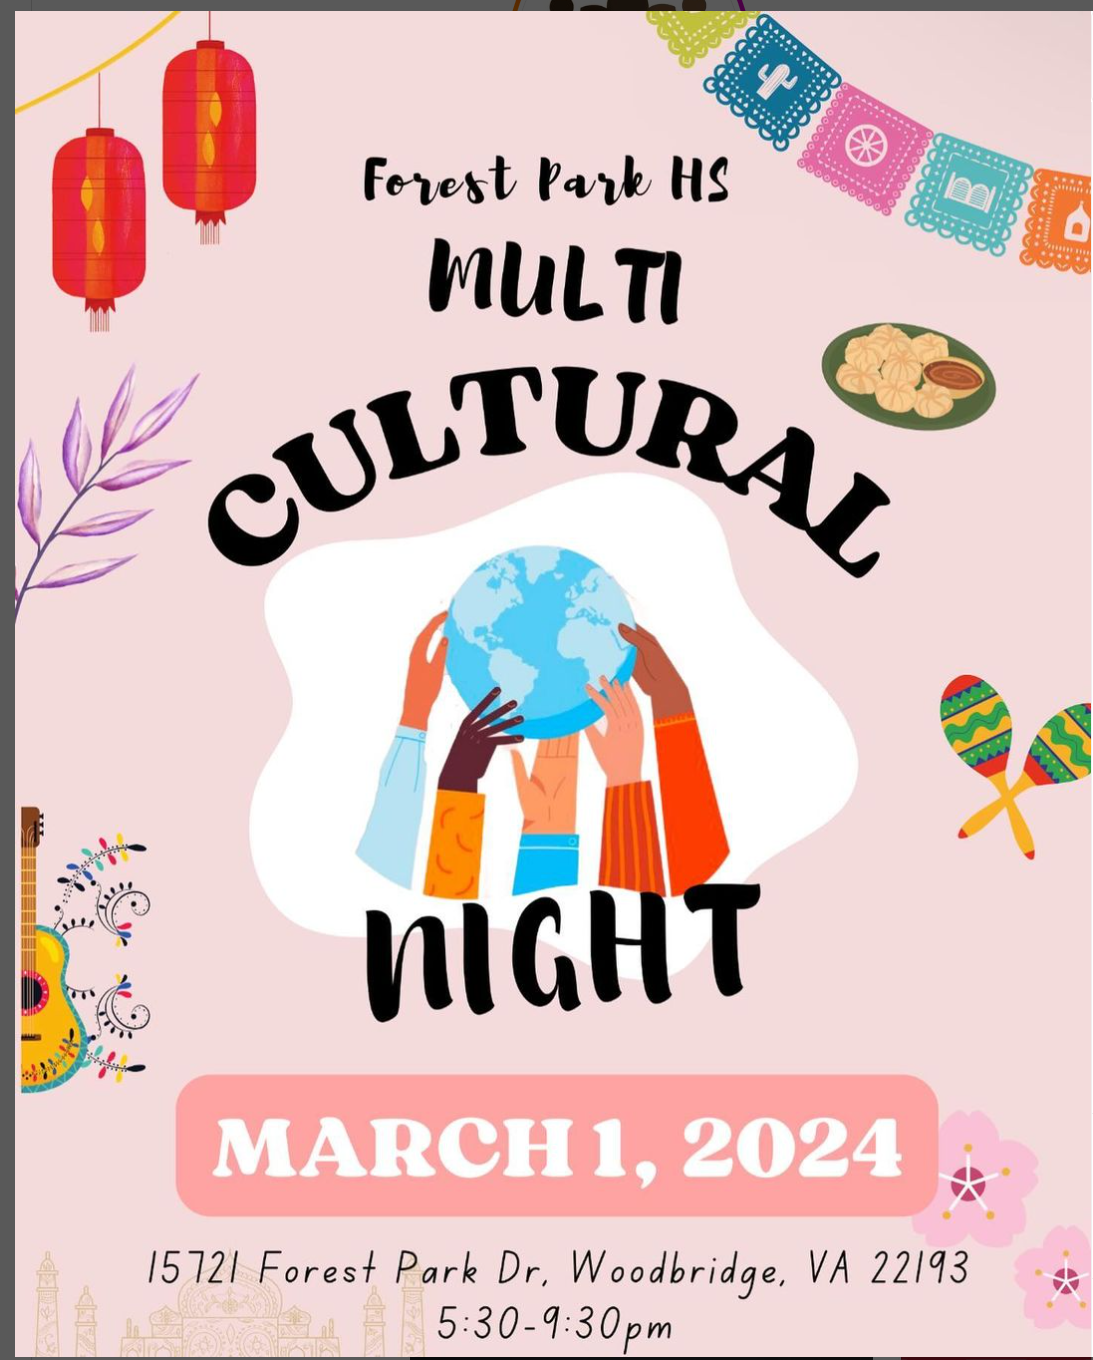 Multicultural Night returns to Freedom Park High School